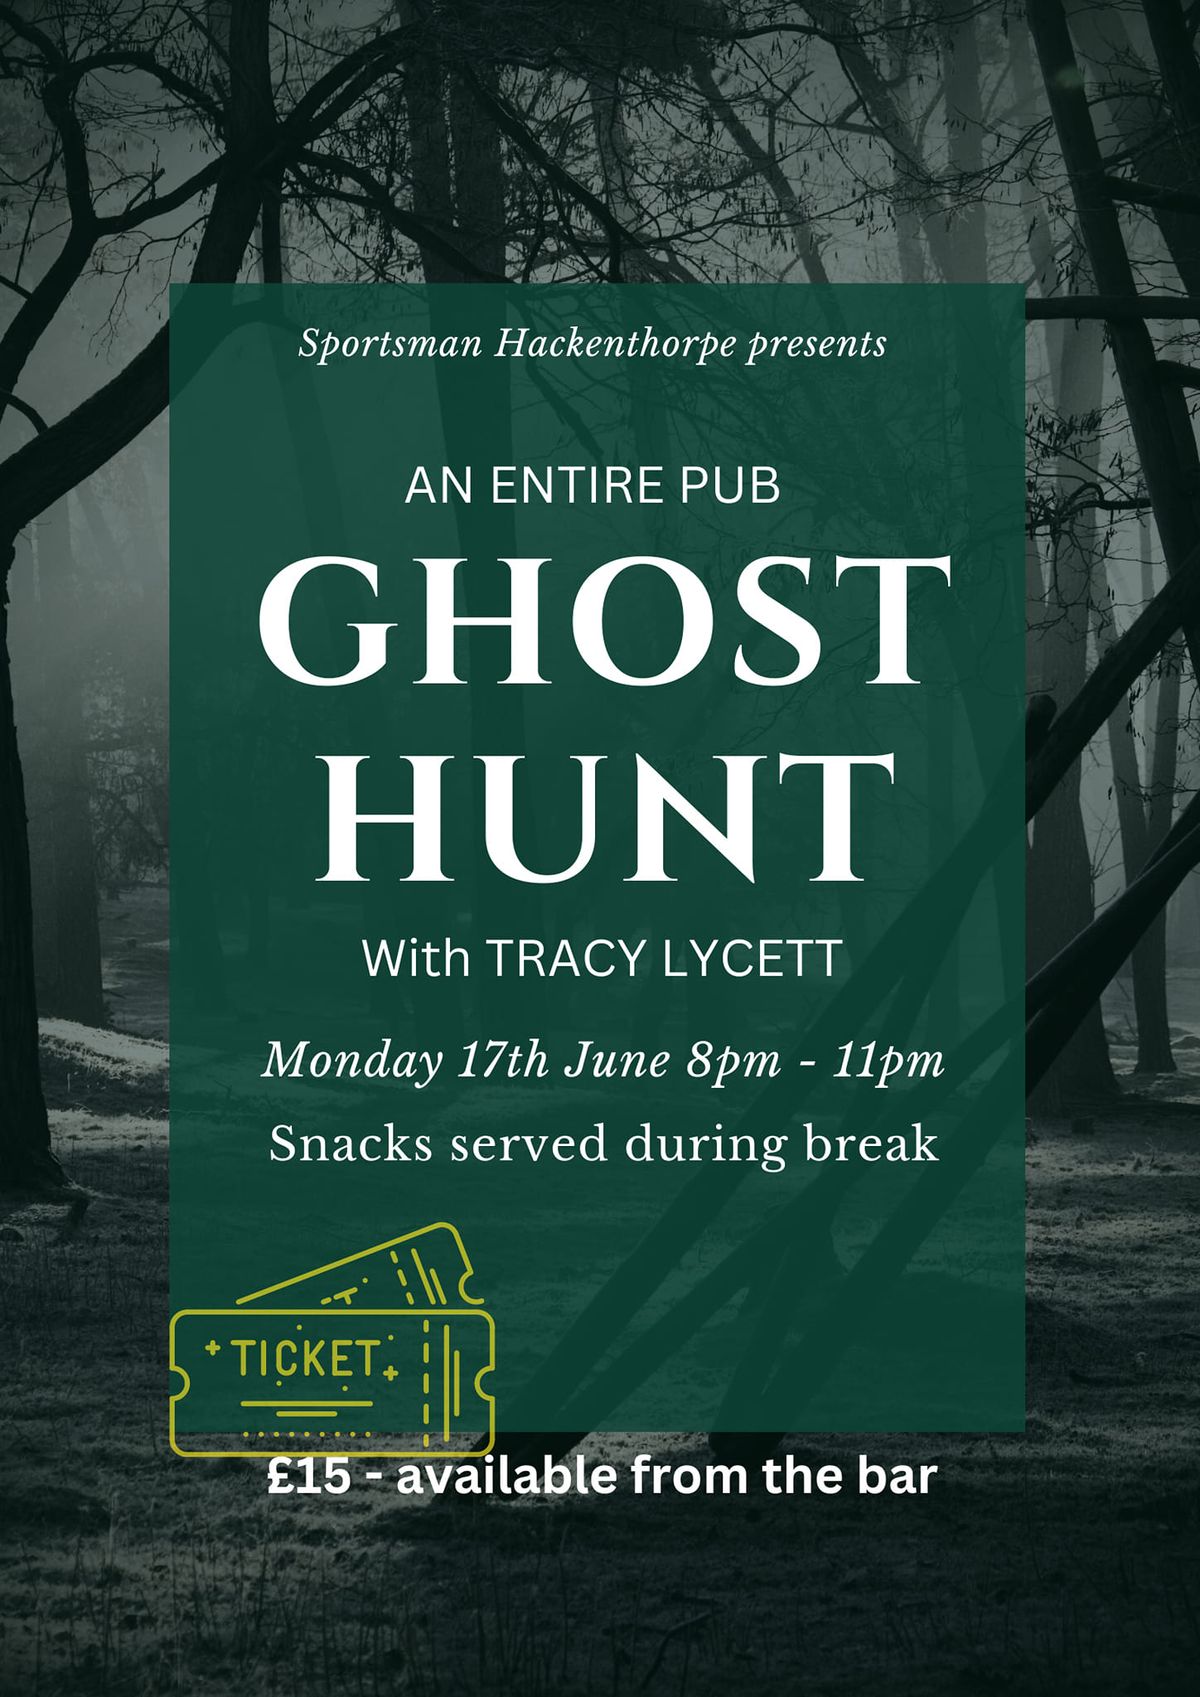 Ghost hunt with Tracy Lycett